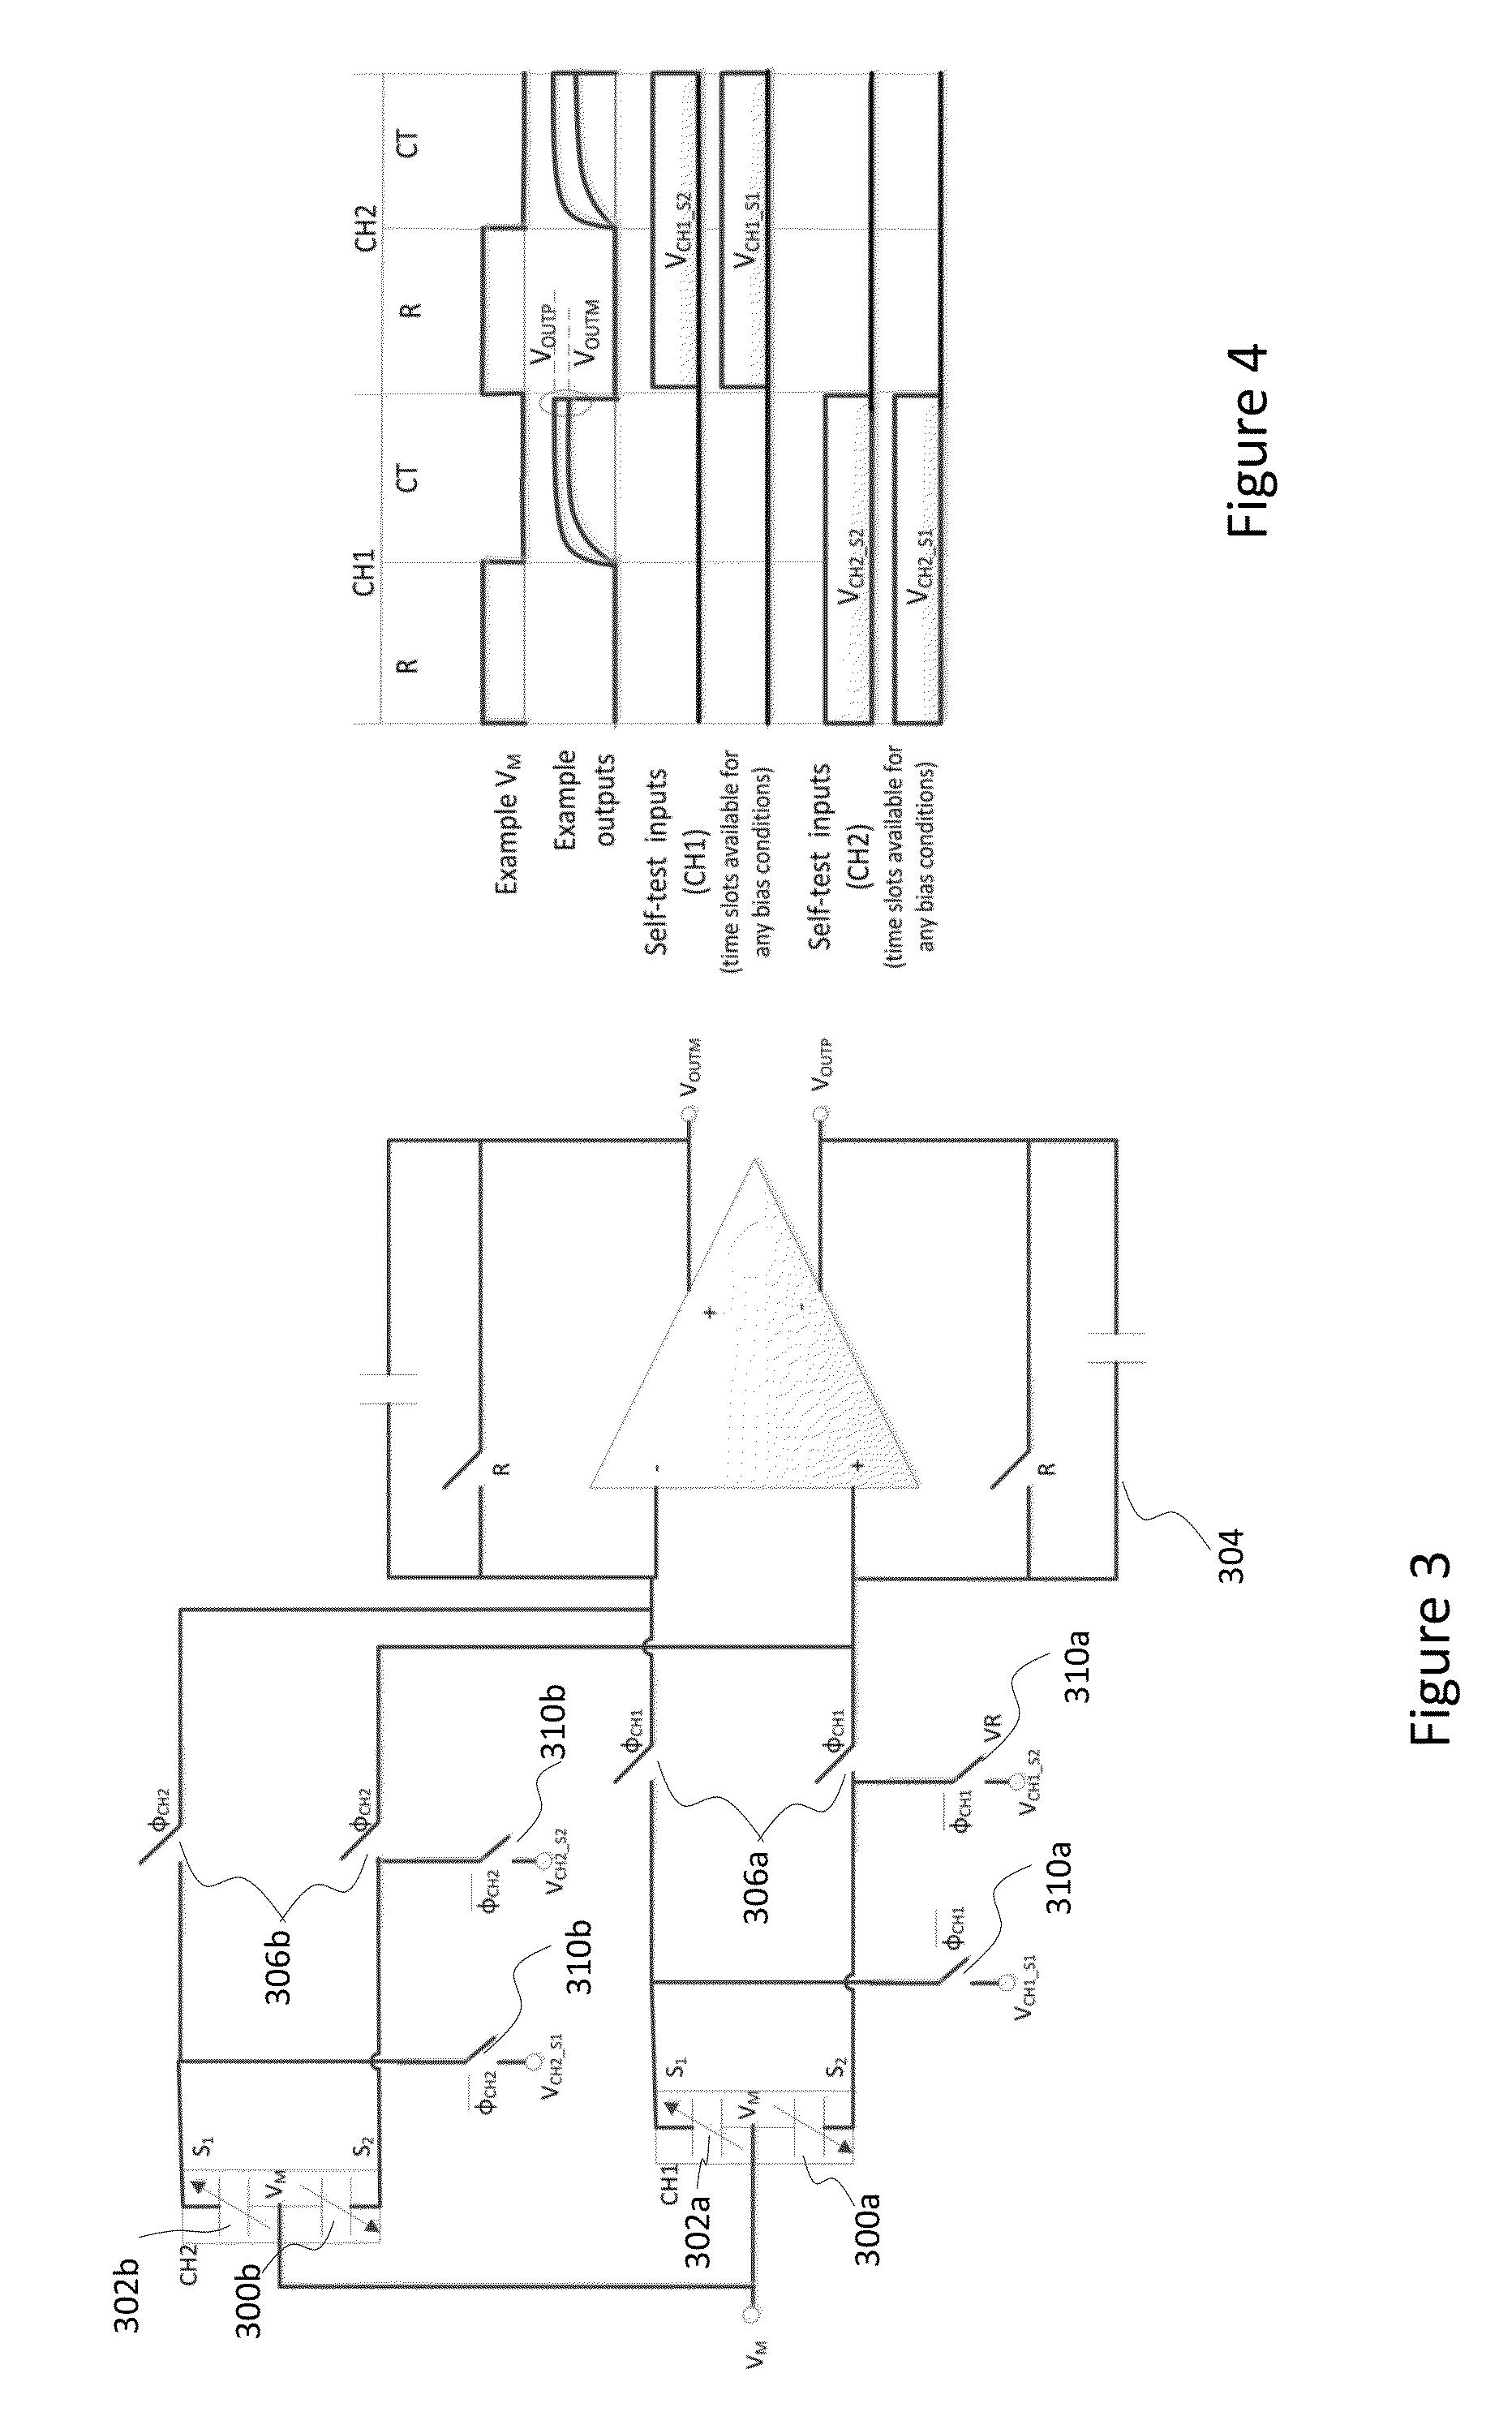 Continuous self-test in capacitive sensor